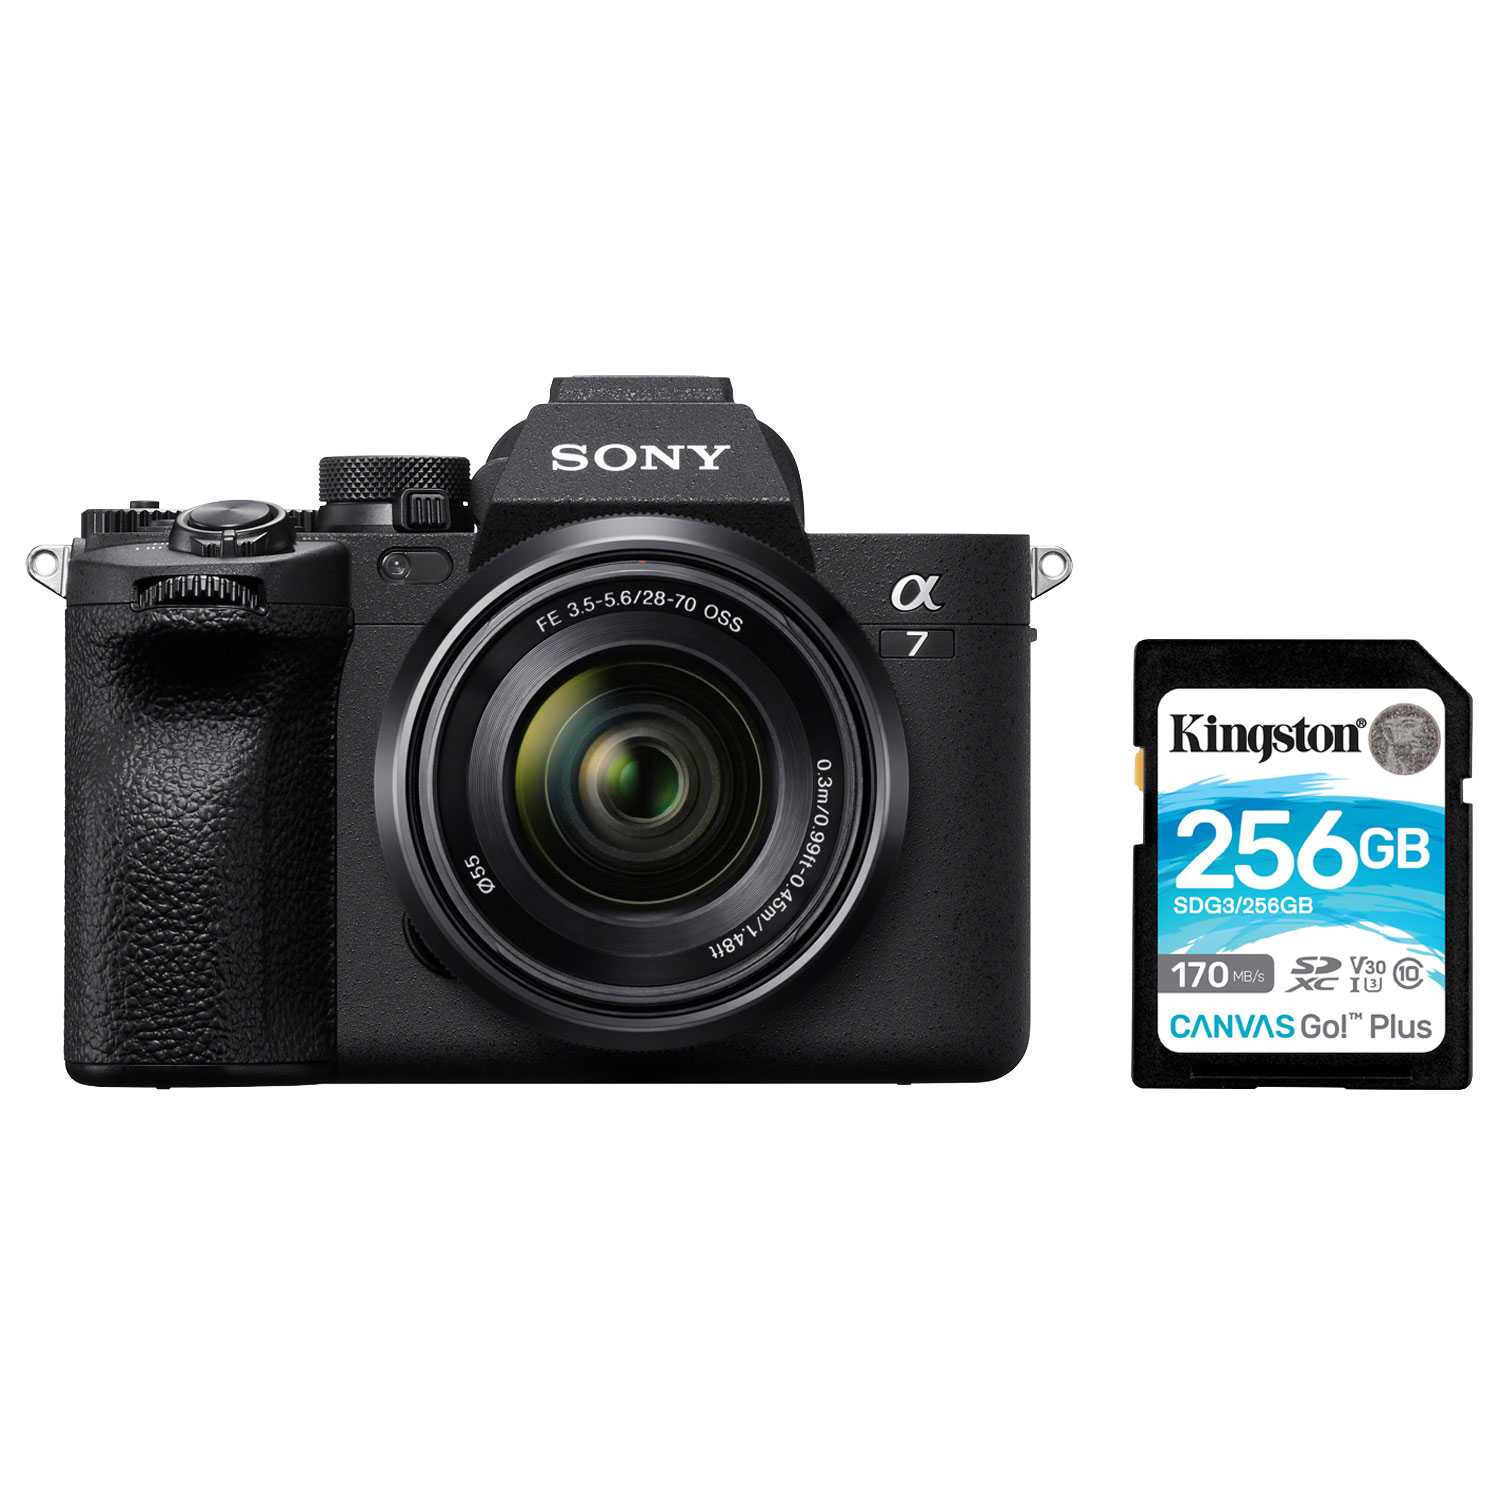 Sony Alpha 7 IV Full-Frame Mirrorless Camera with 28-70mm Lens Kit & 256GB 170MB/s SDXC Memory Card